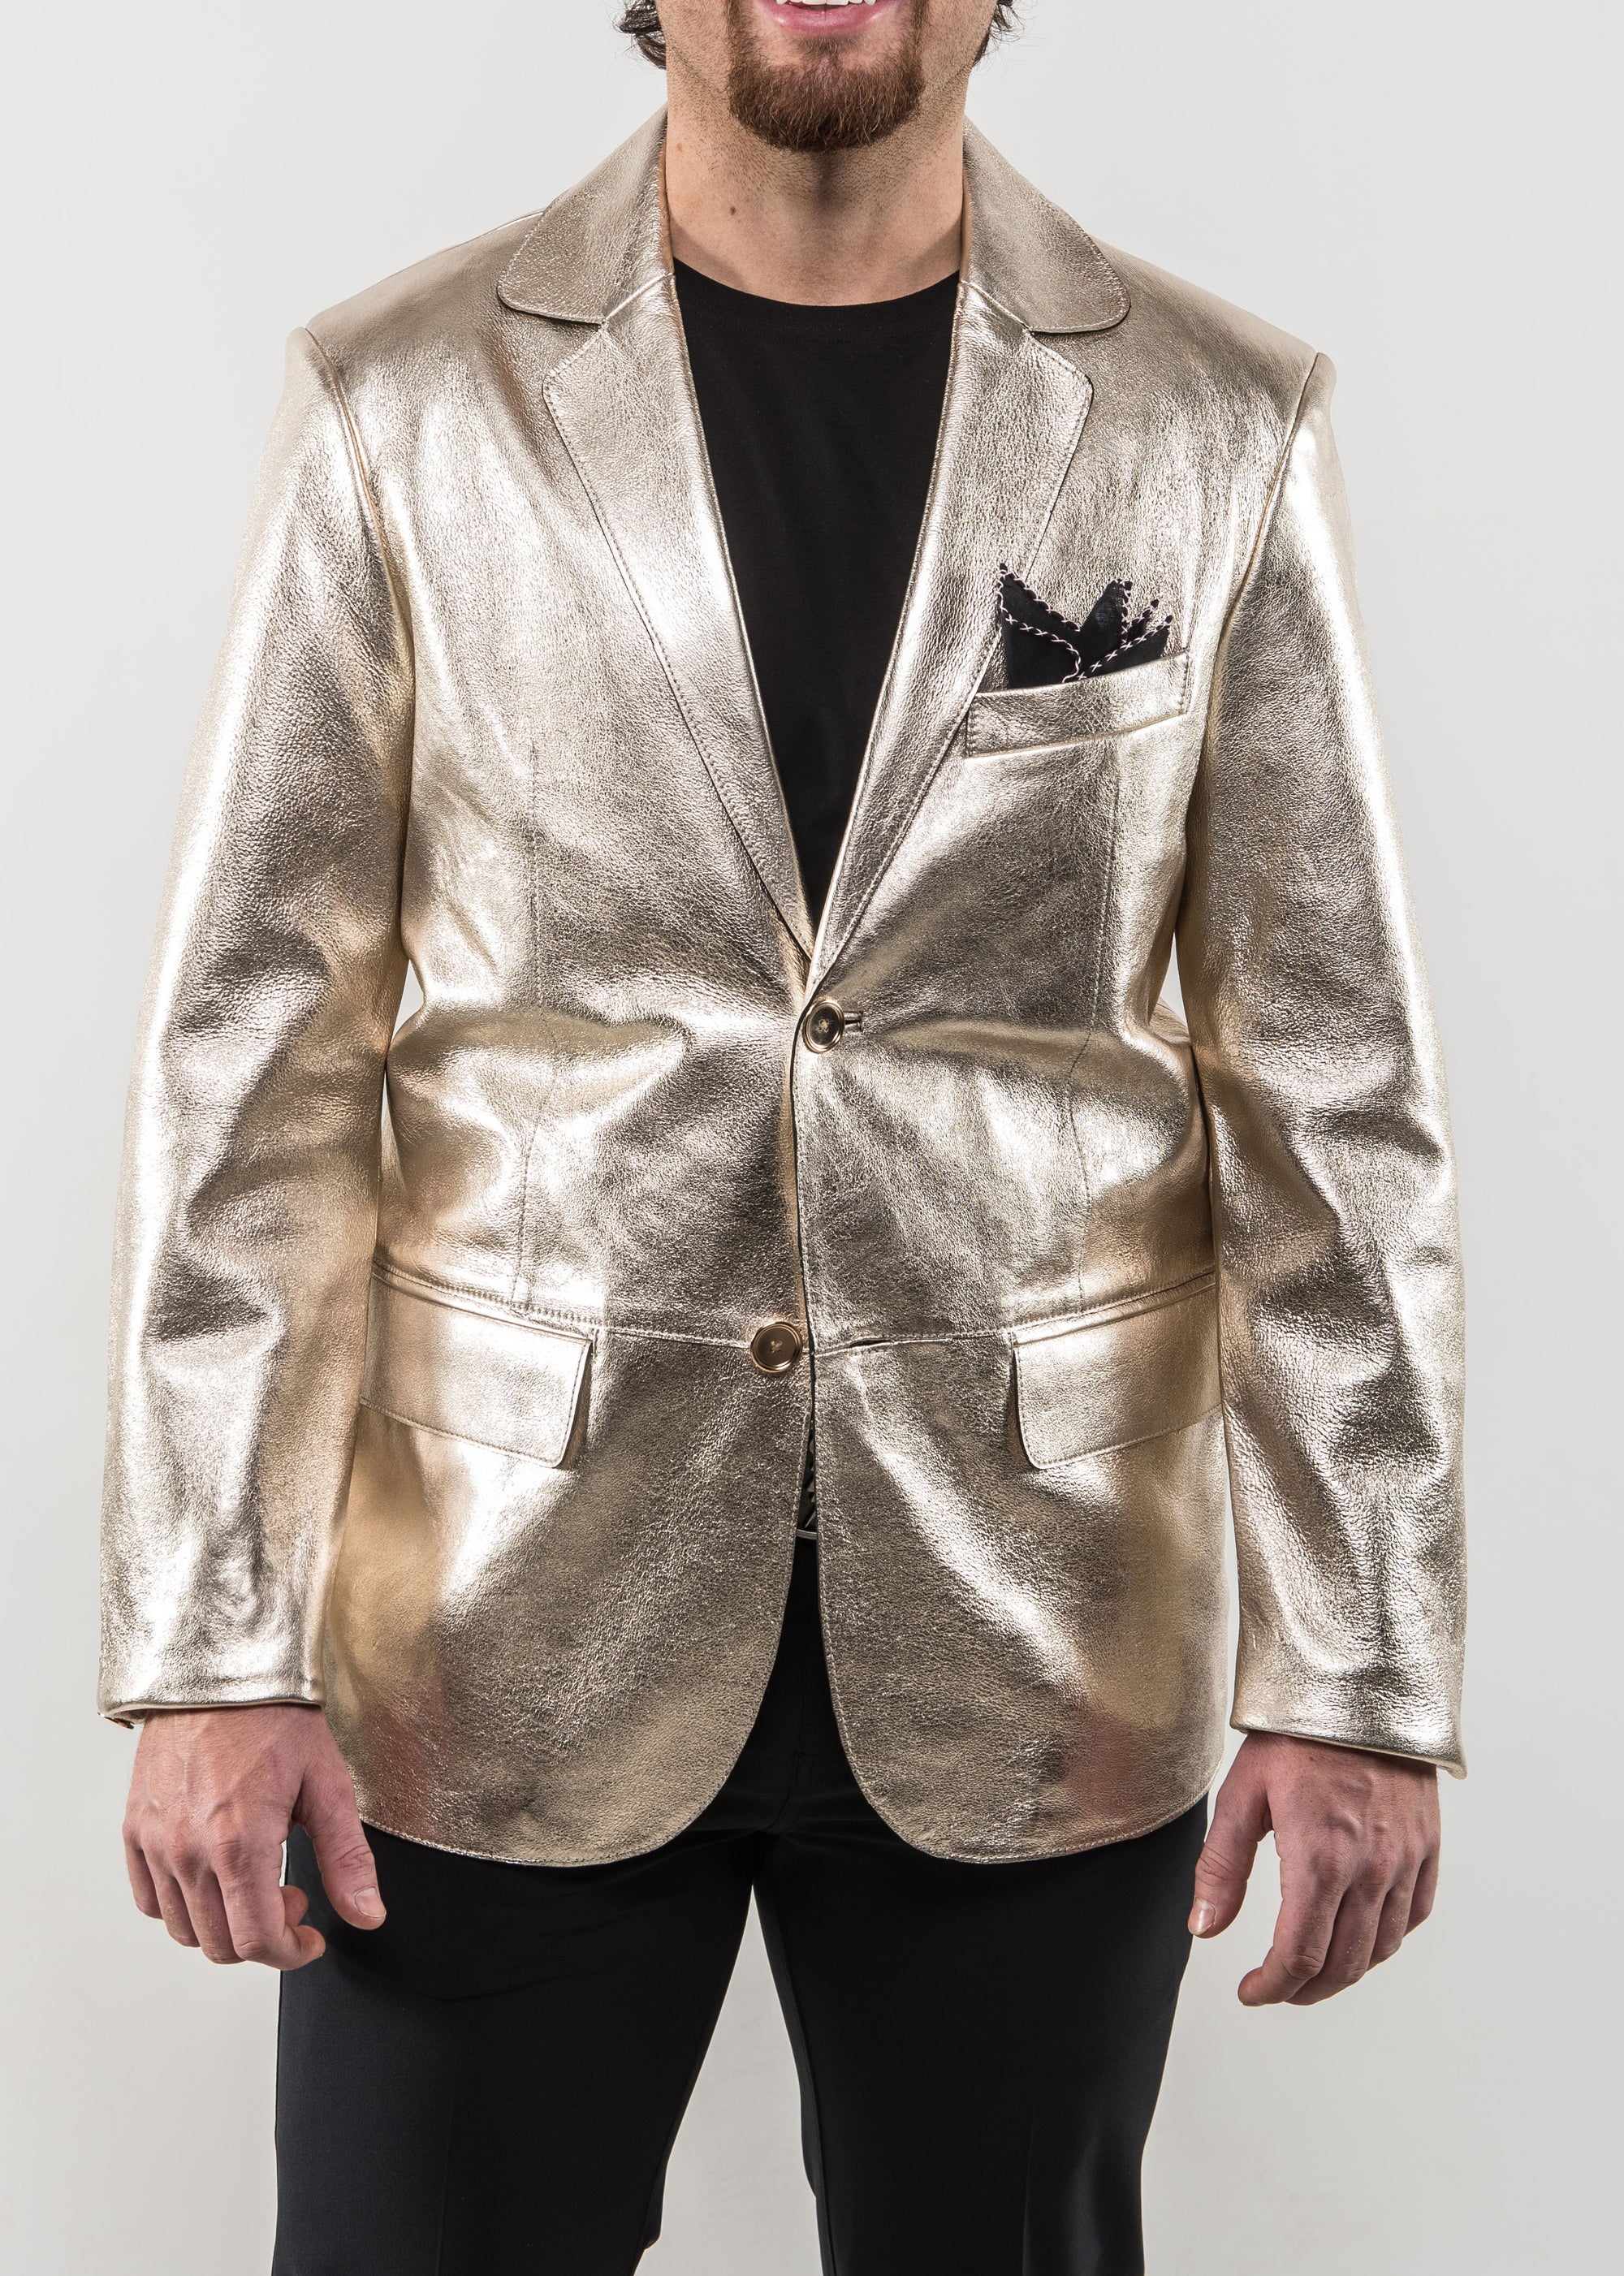 Liquid Sheen Solid Gold Moto Jacket - Trader Rick's for the artful